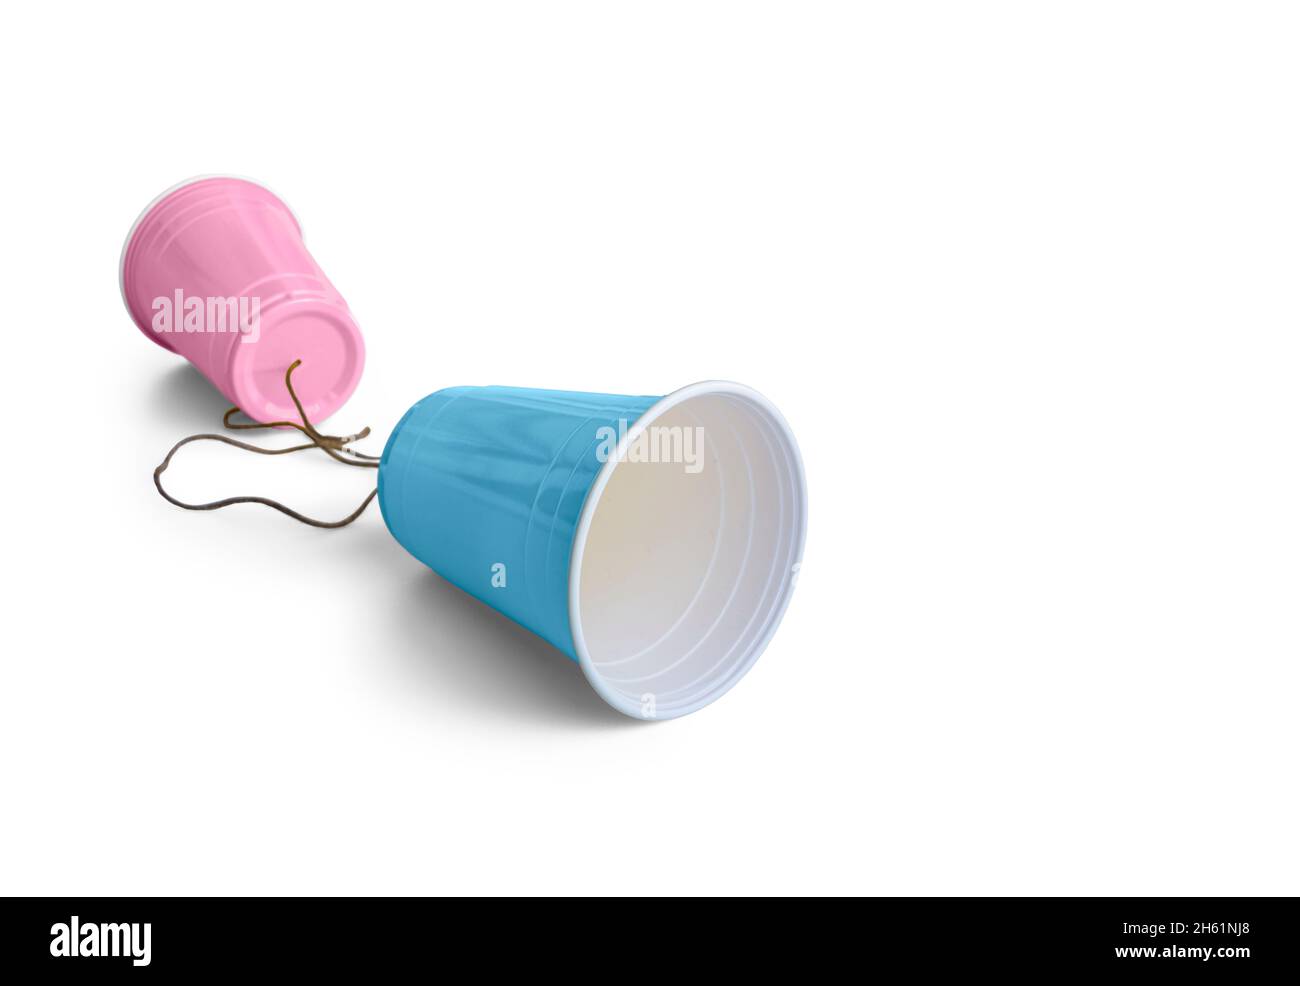 Comunication pink & blue plastic cup with string Stock Photo